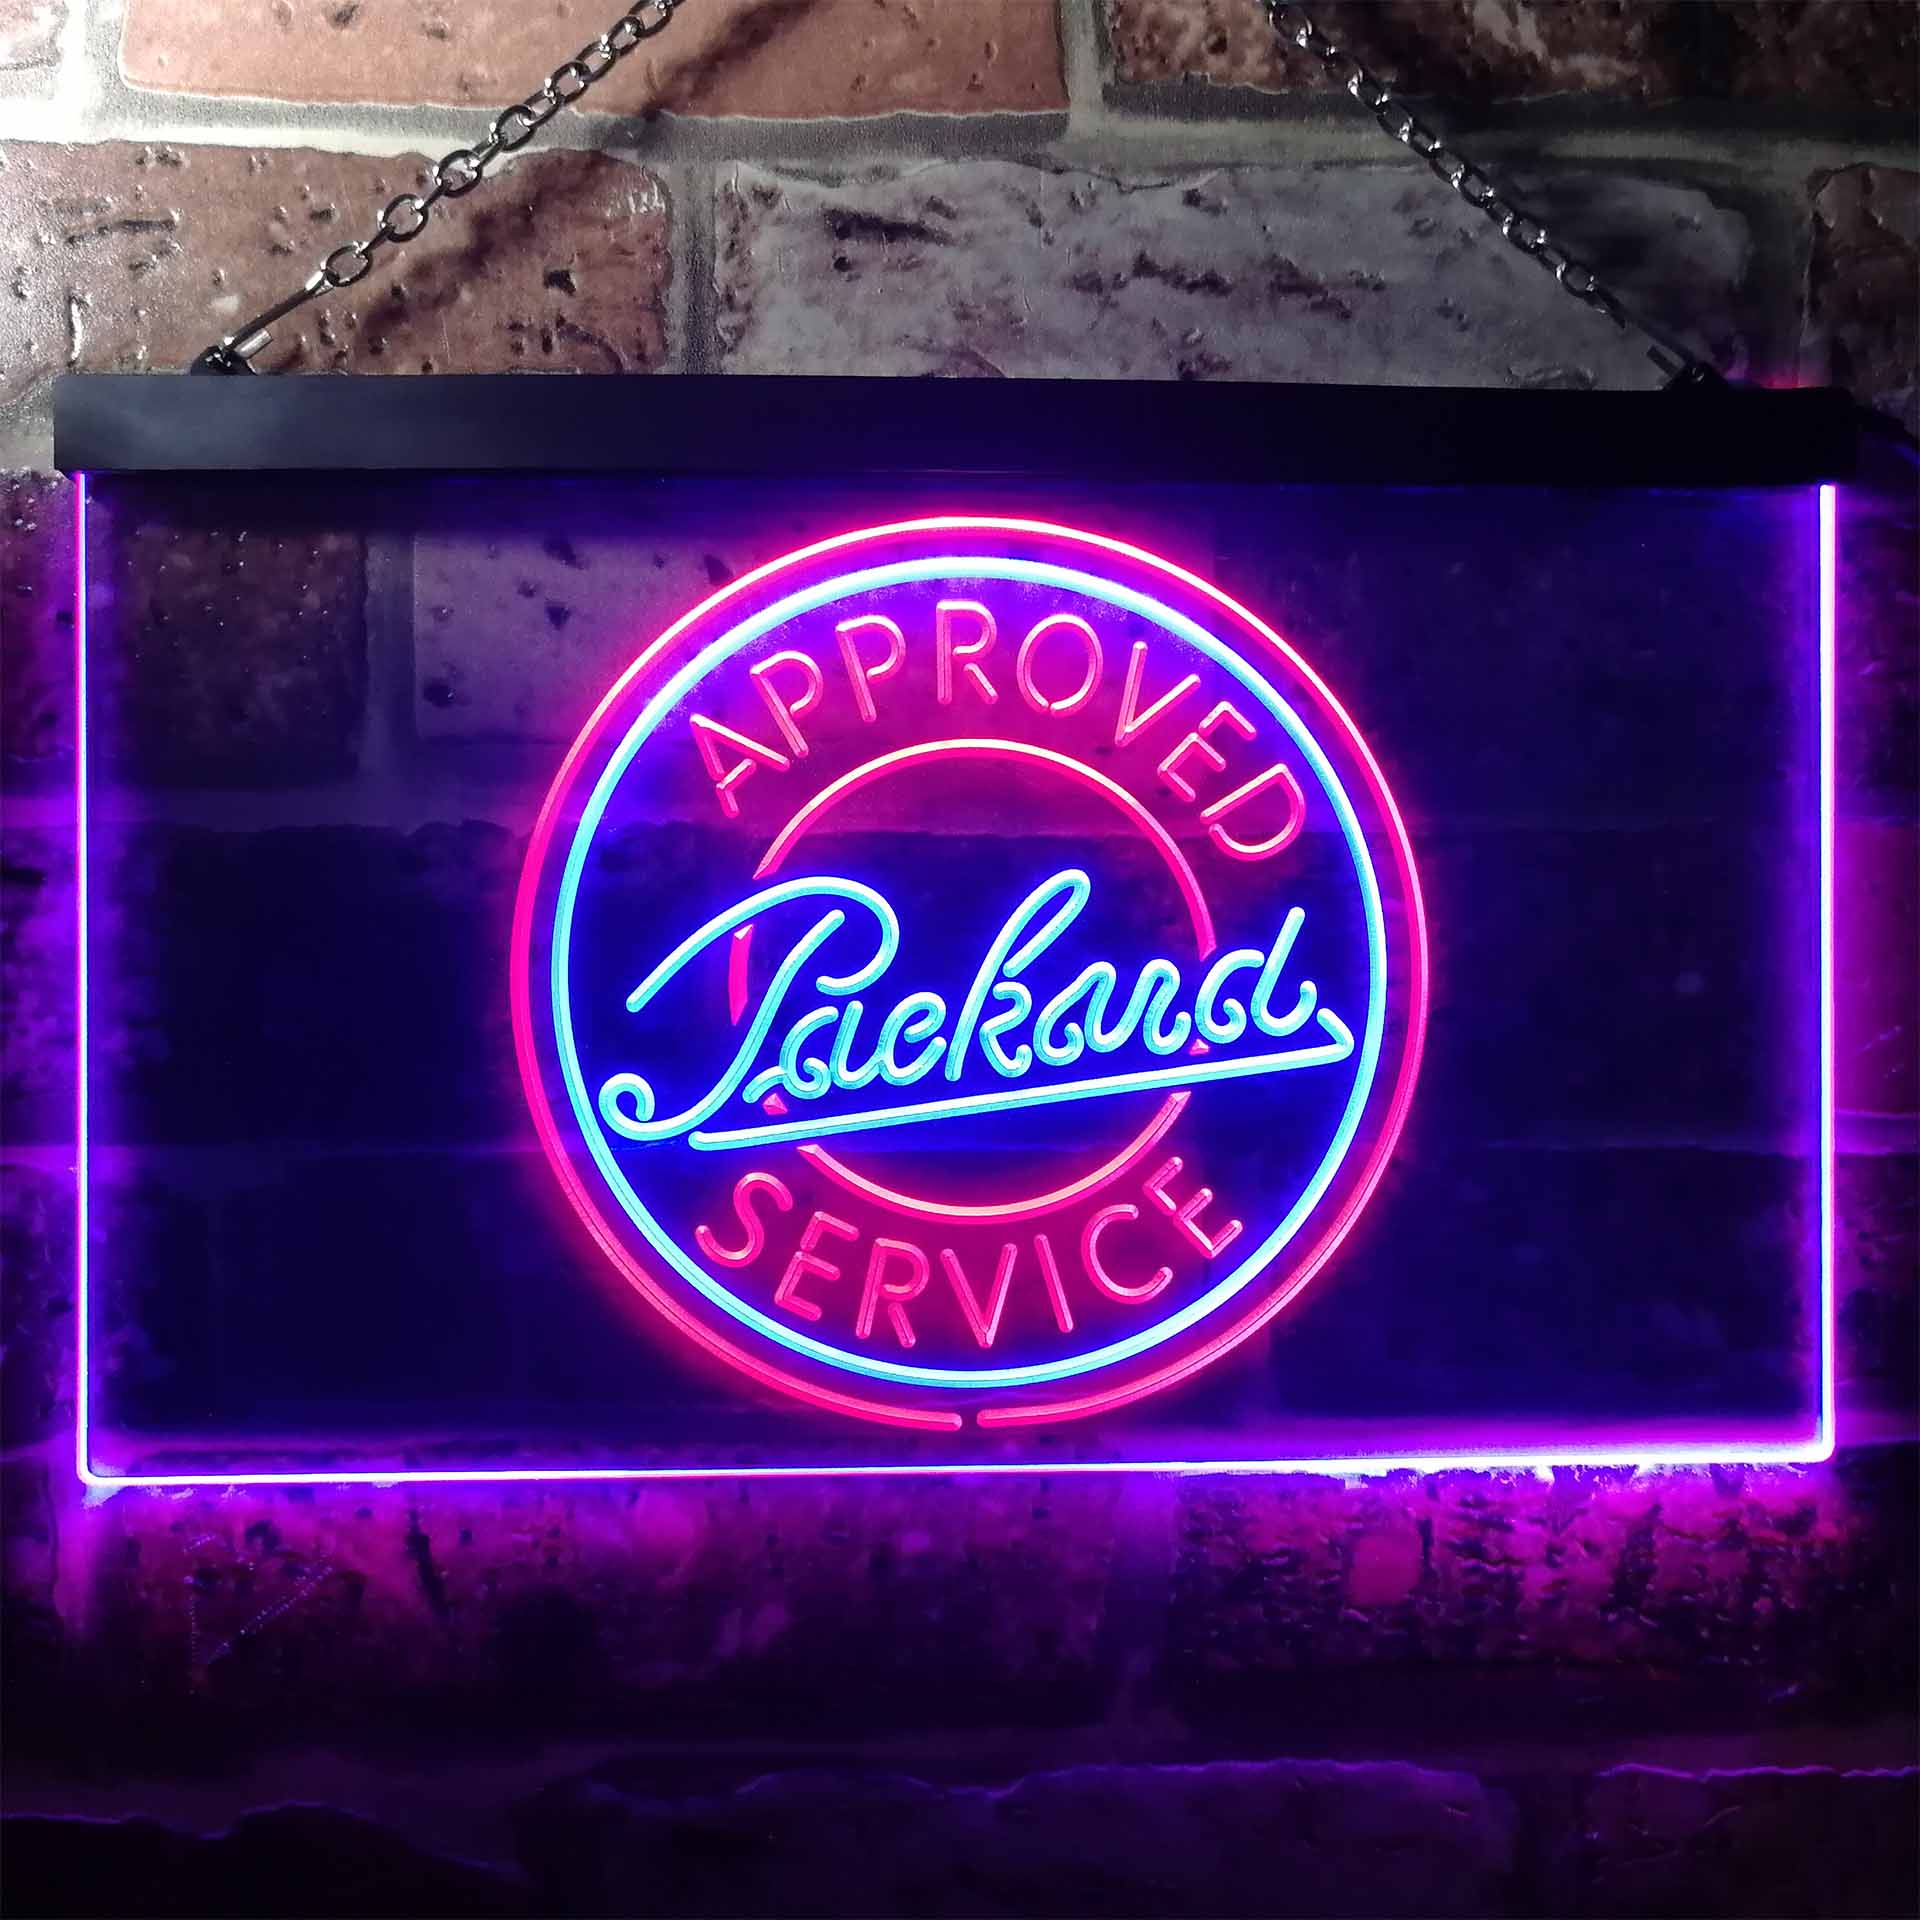 Approved Packard Service Garage Neon LED Sign